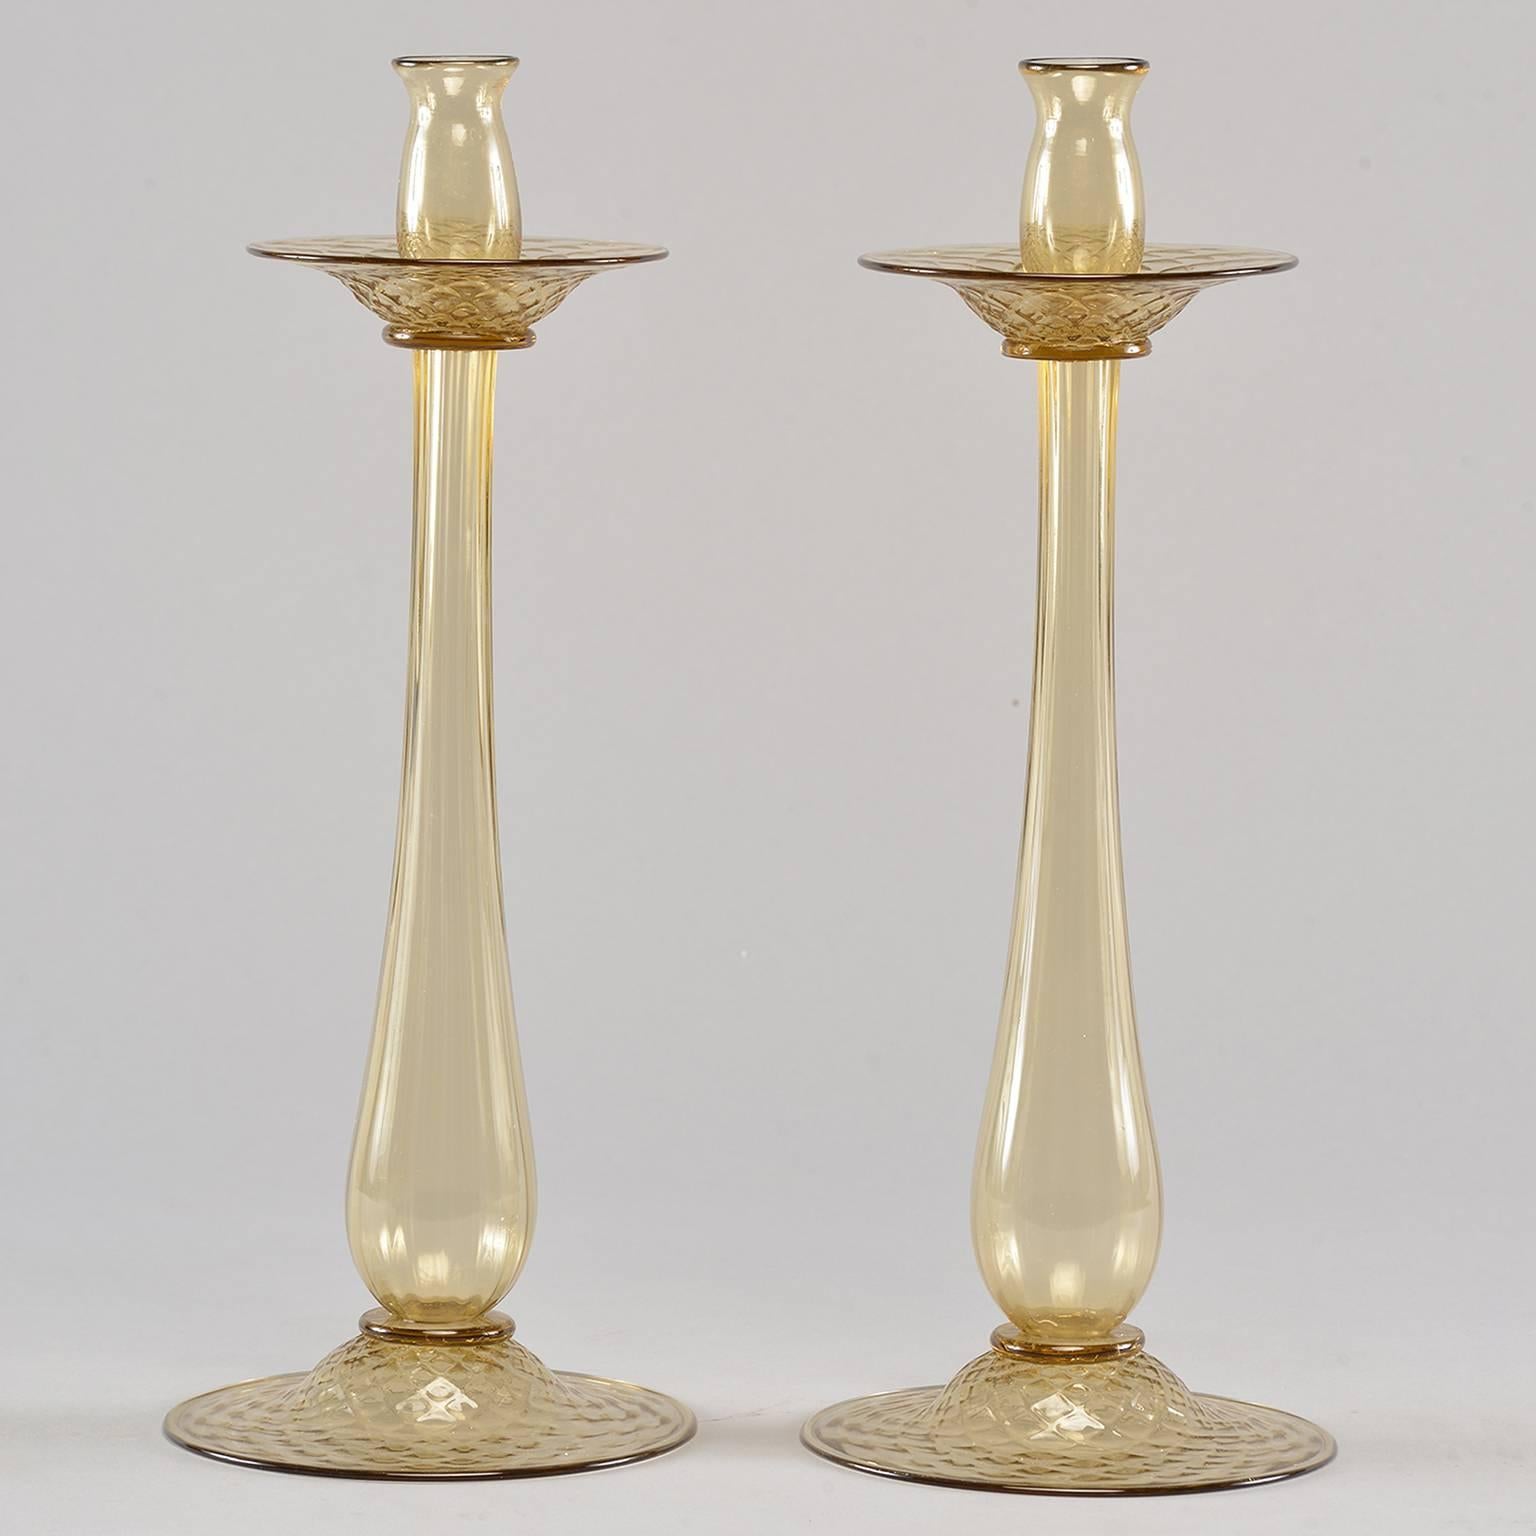 Pair of circa 1930s pale amber handblown Murano glass candlesticks attributed to Barovier and Toso. Bases and bobeches have a subtle surface textured diamond pattern. Unmarked by maker, but obtained in Italy from a reliable dealer of vintage